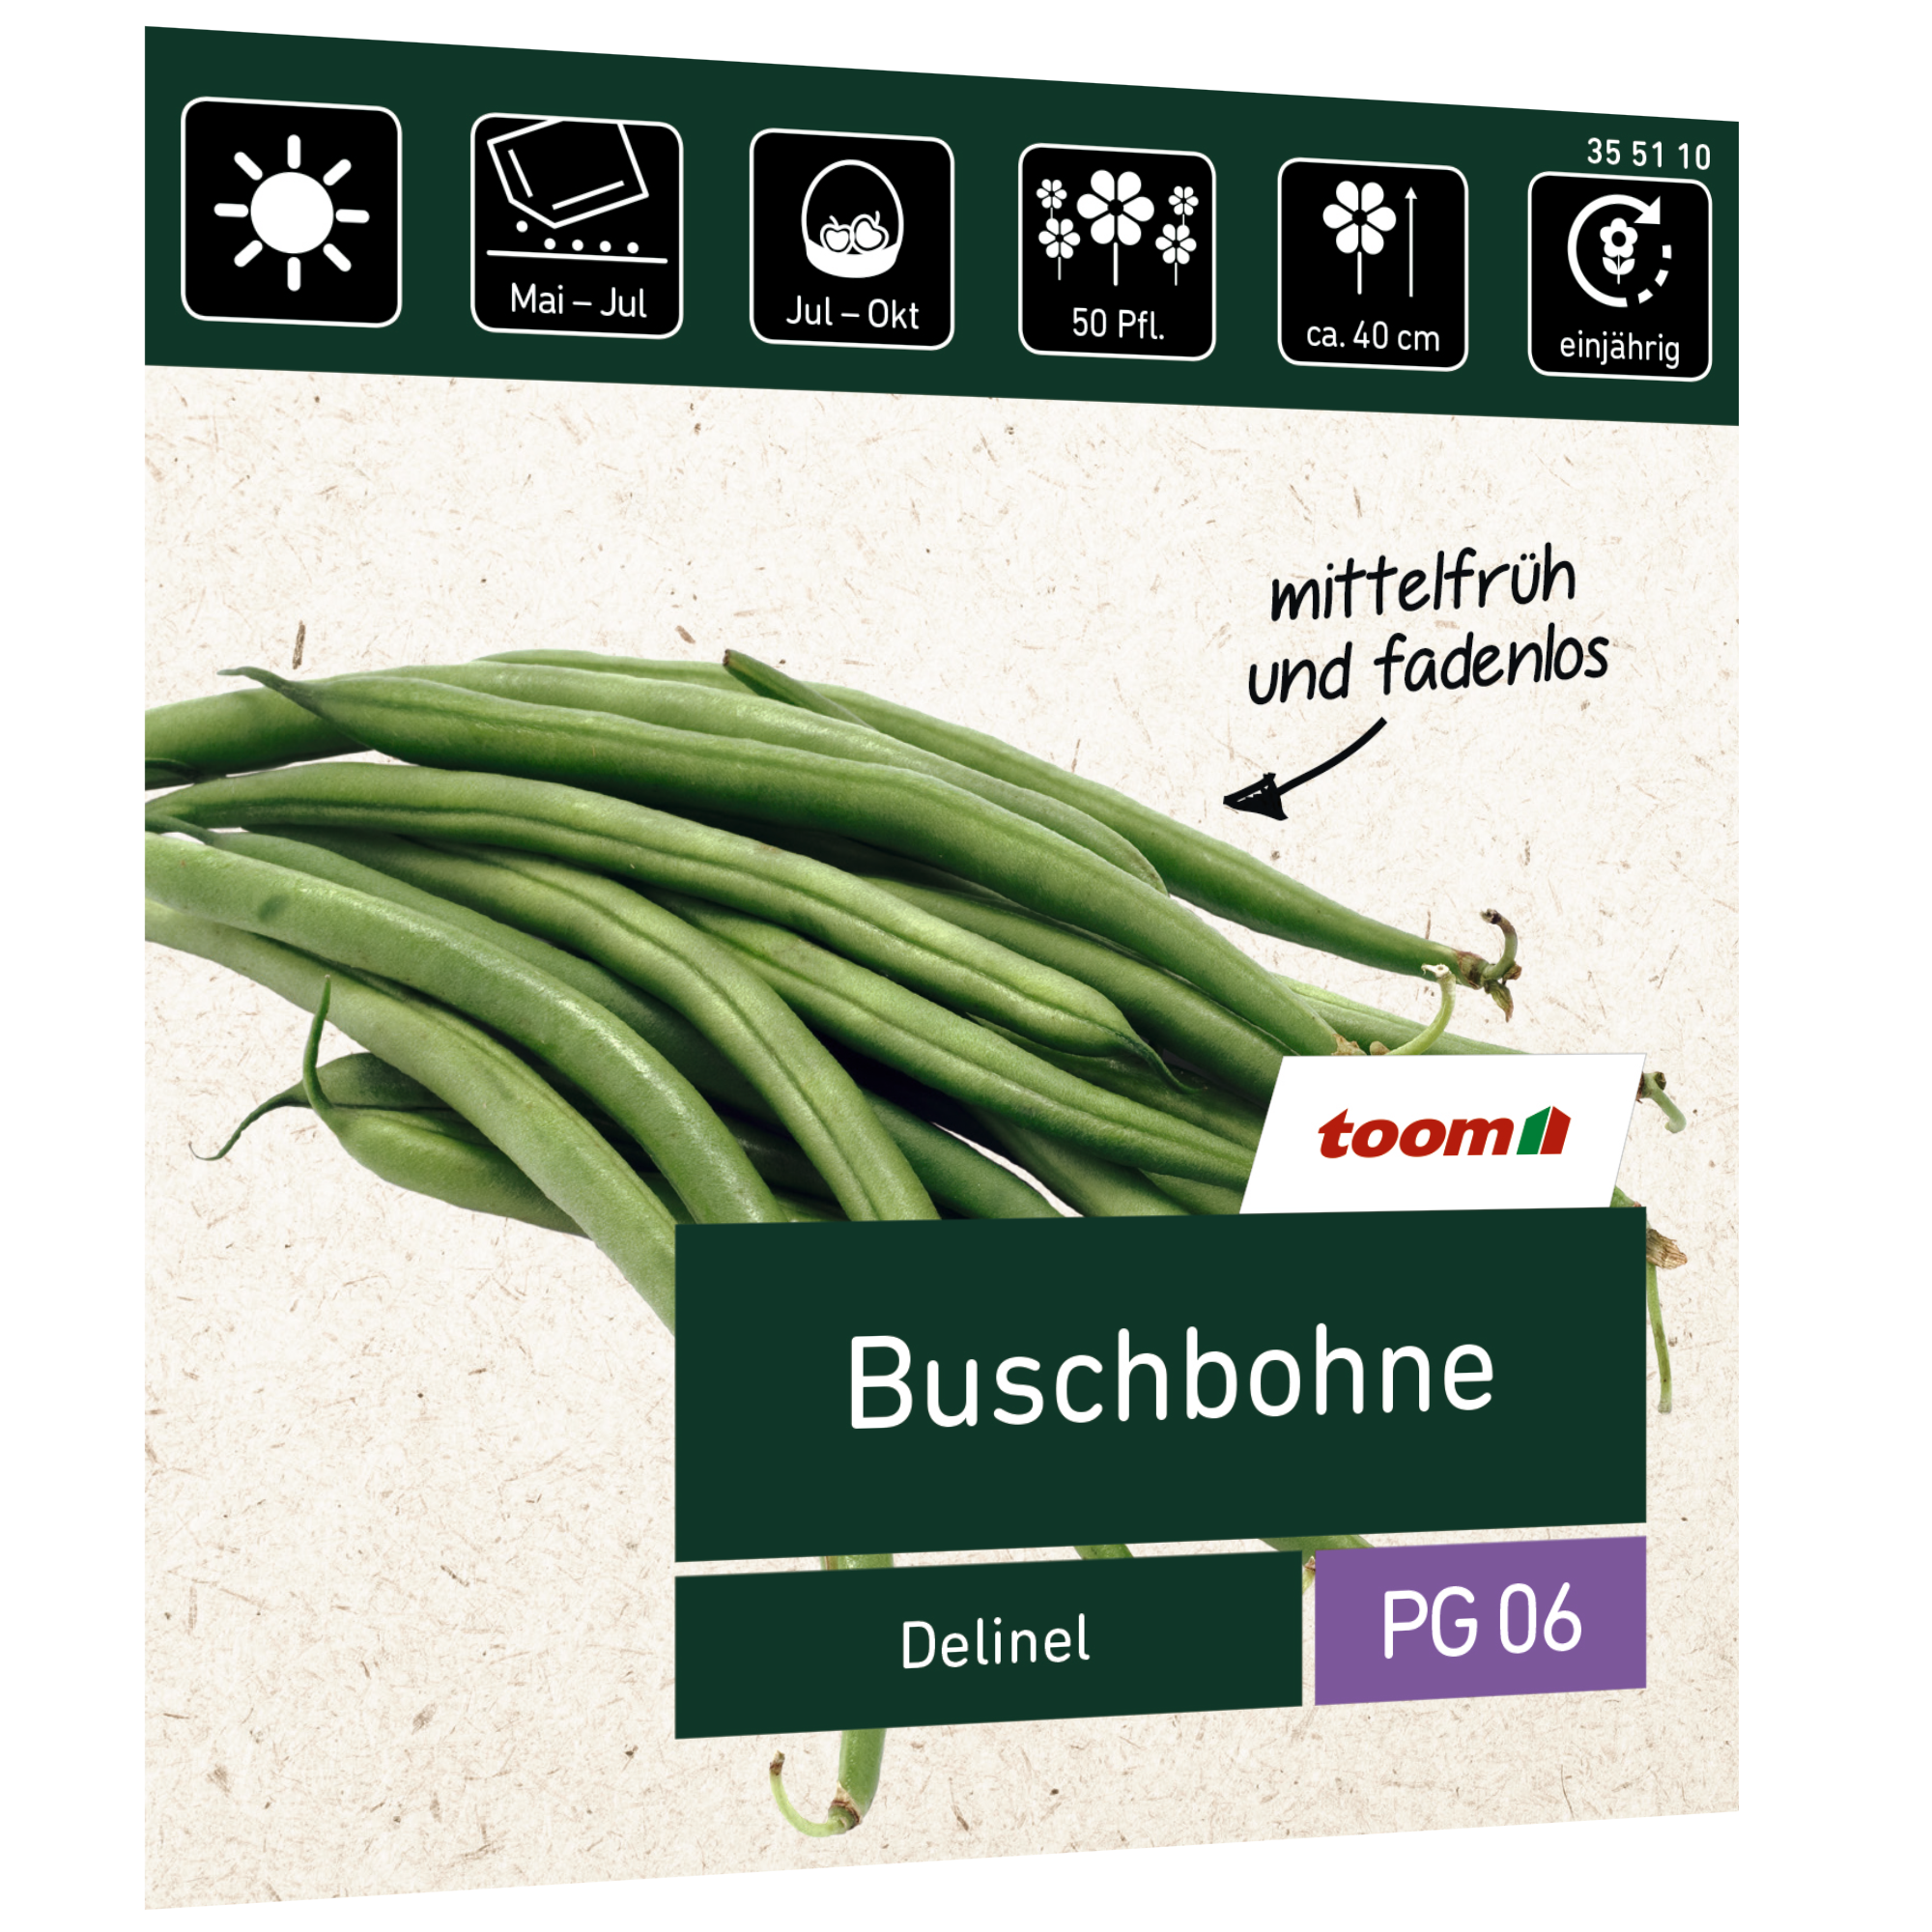 Buschbohne 'Delinel' + product picture